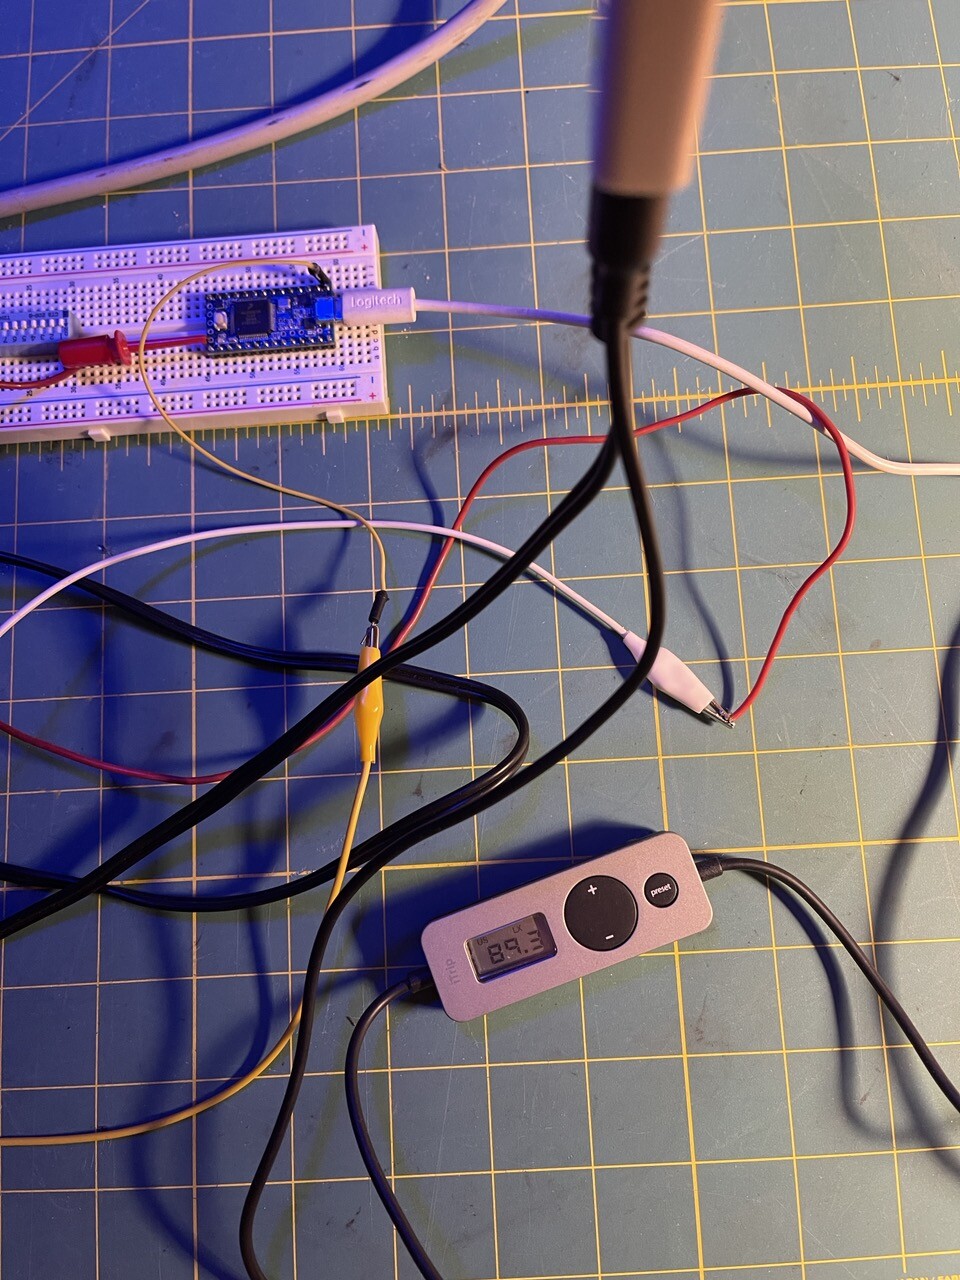 Wires, a small nano FM broadcaster, and a protoboard with a Teensy microcontroller. 